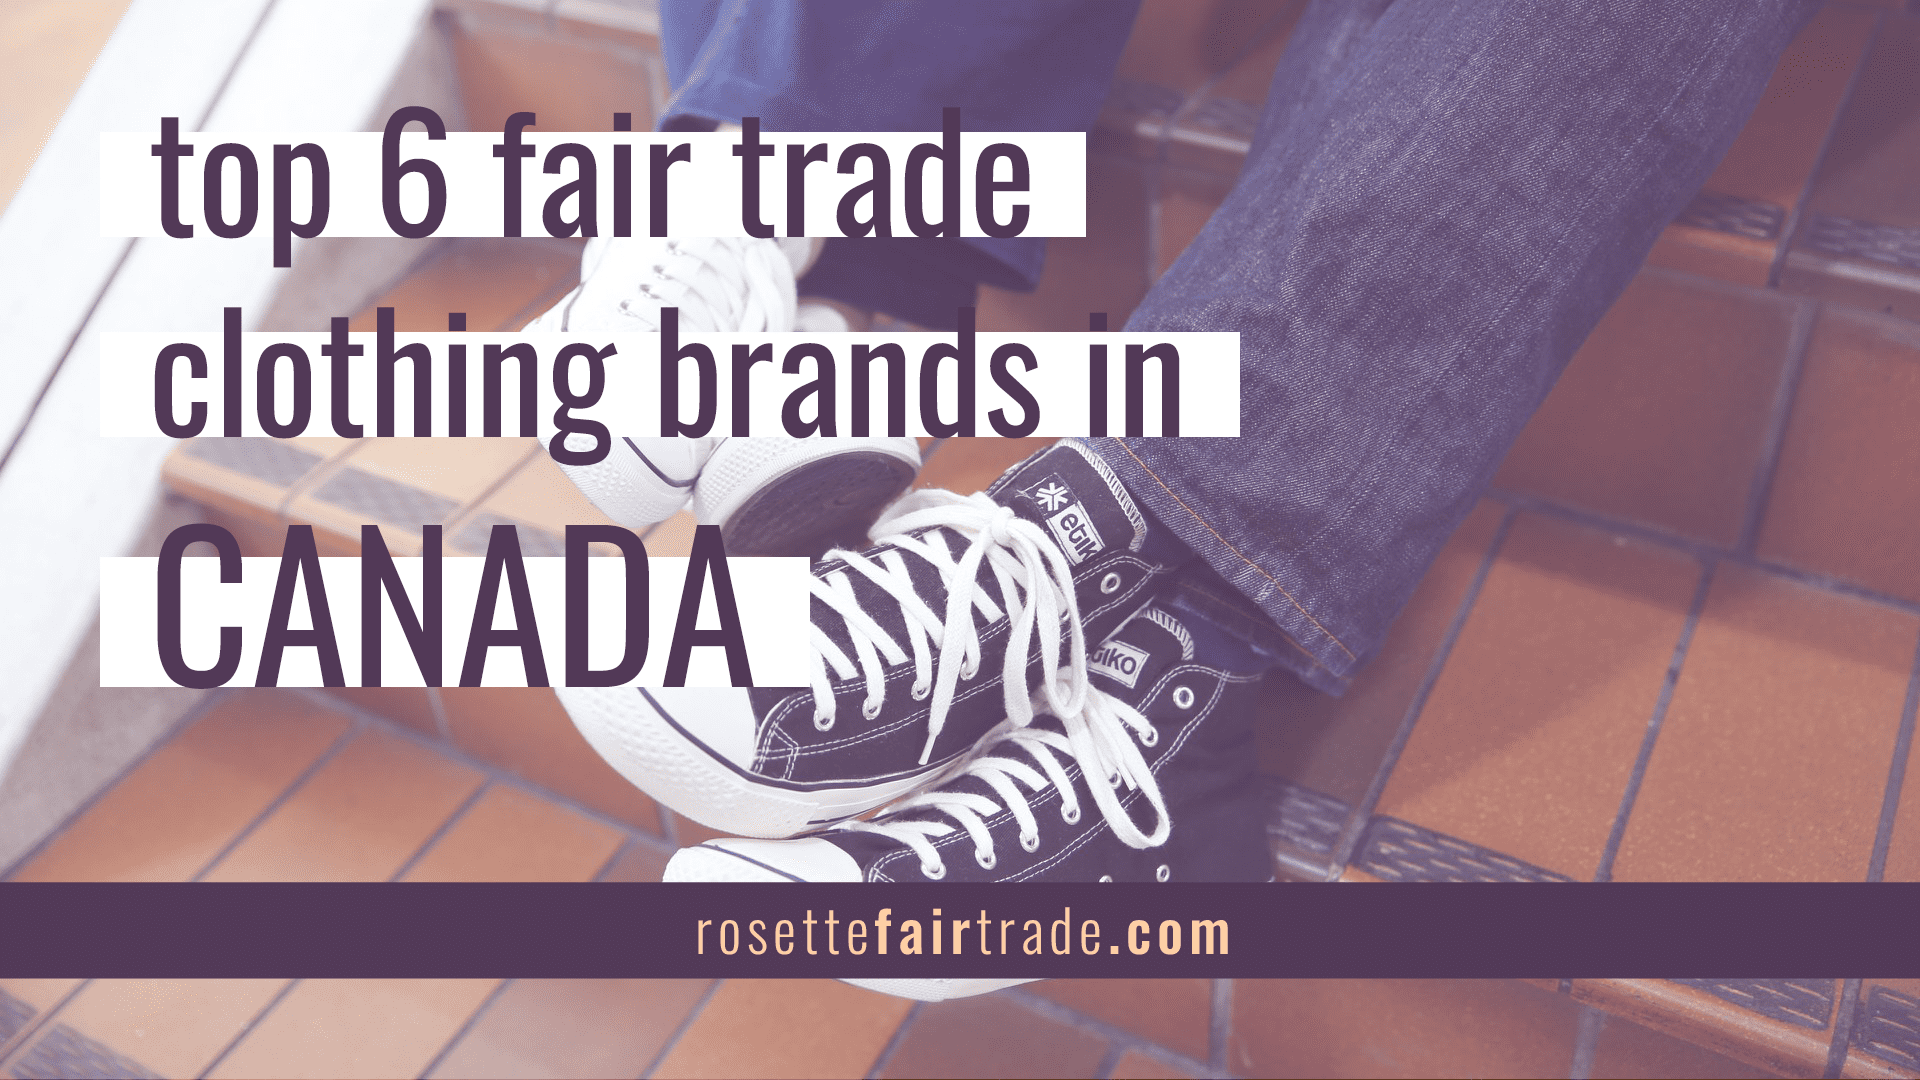 Top 6 fair trade clothing brands in Canada on Rosette Fair Trade (etik and co)